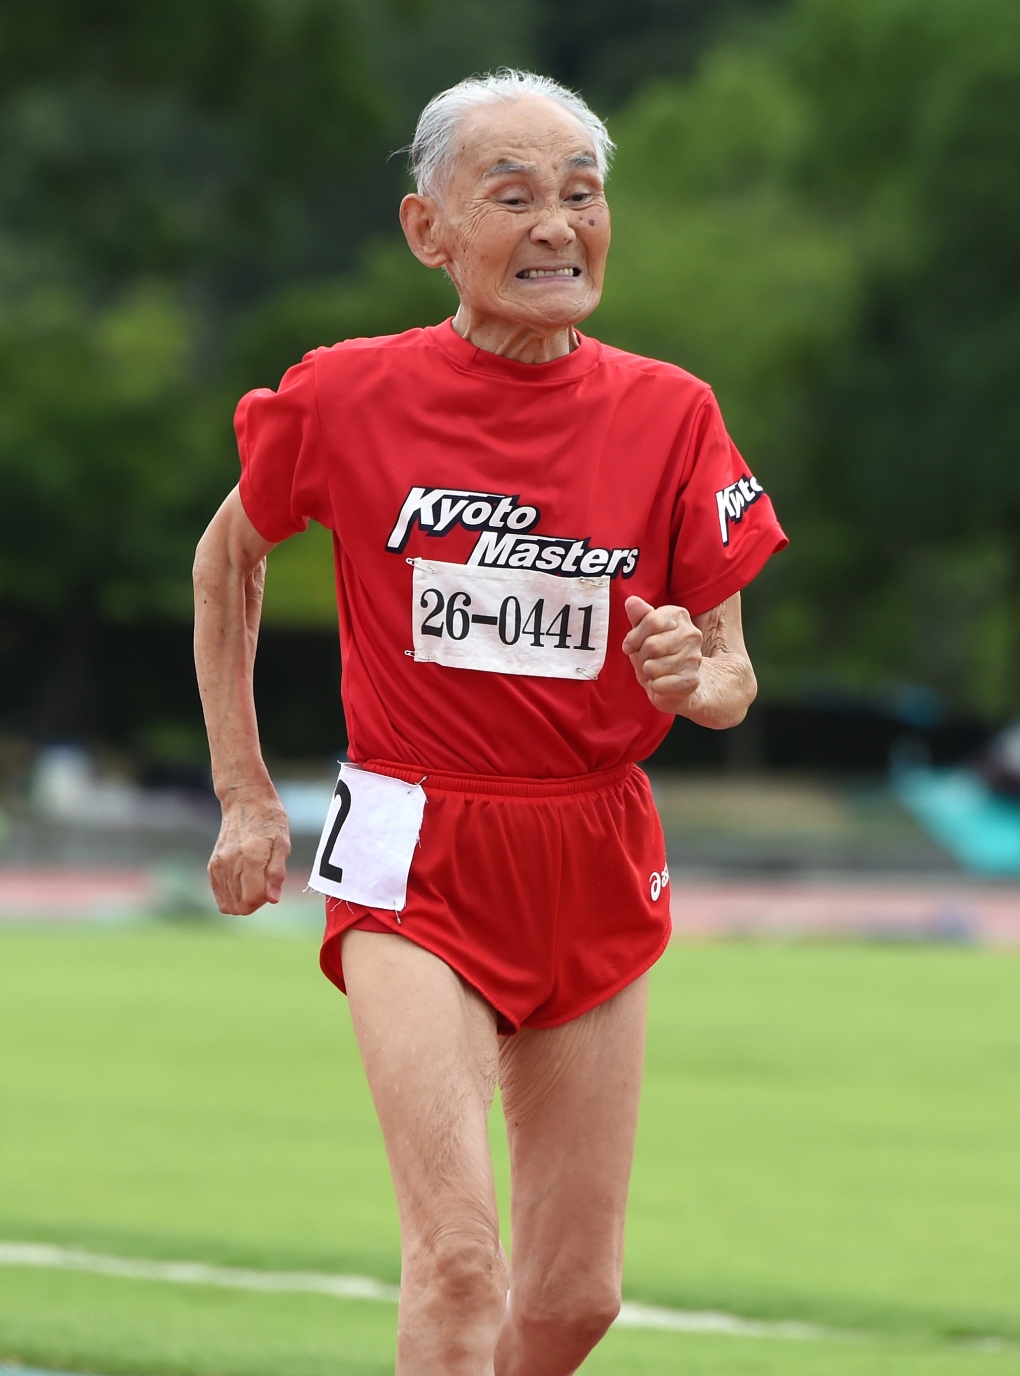 103-year-old Japanese sprinter challenges Usain Bolt to a race | CTV News